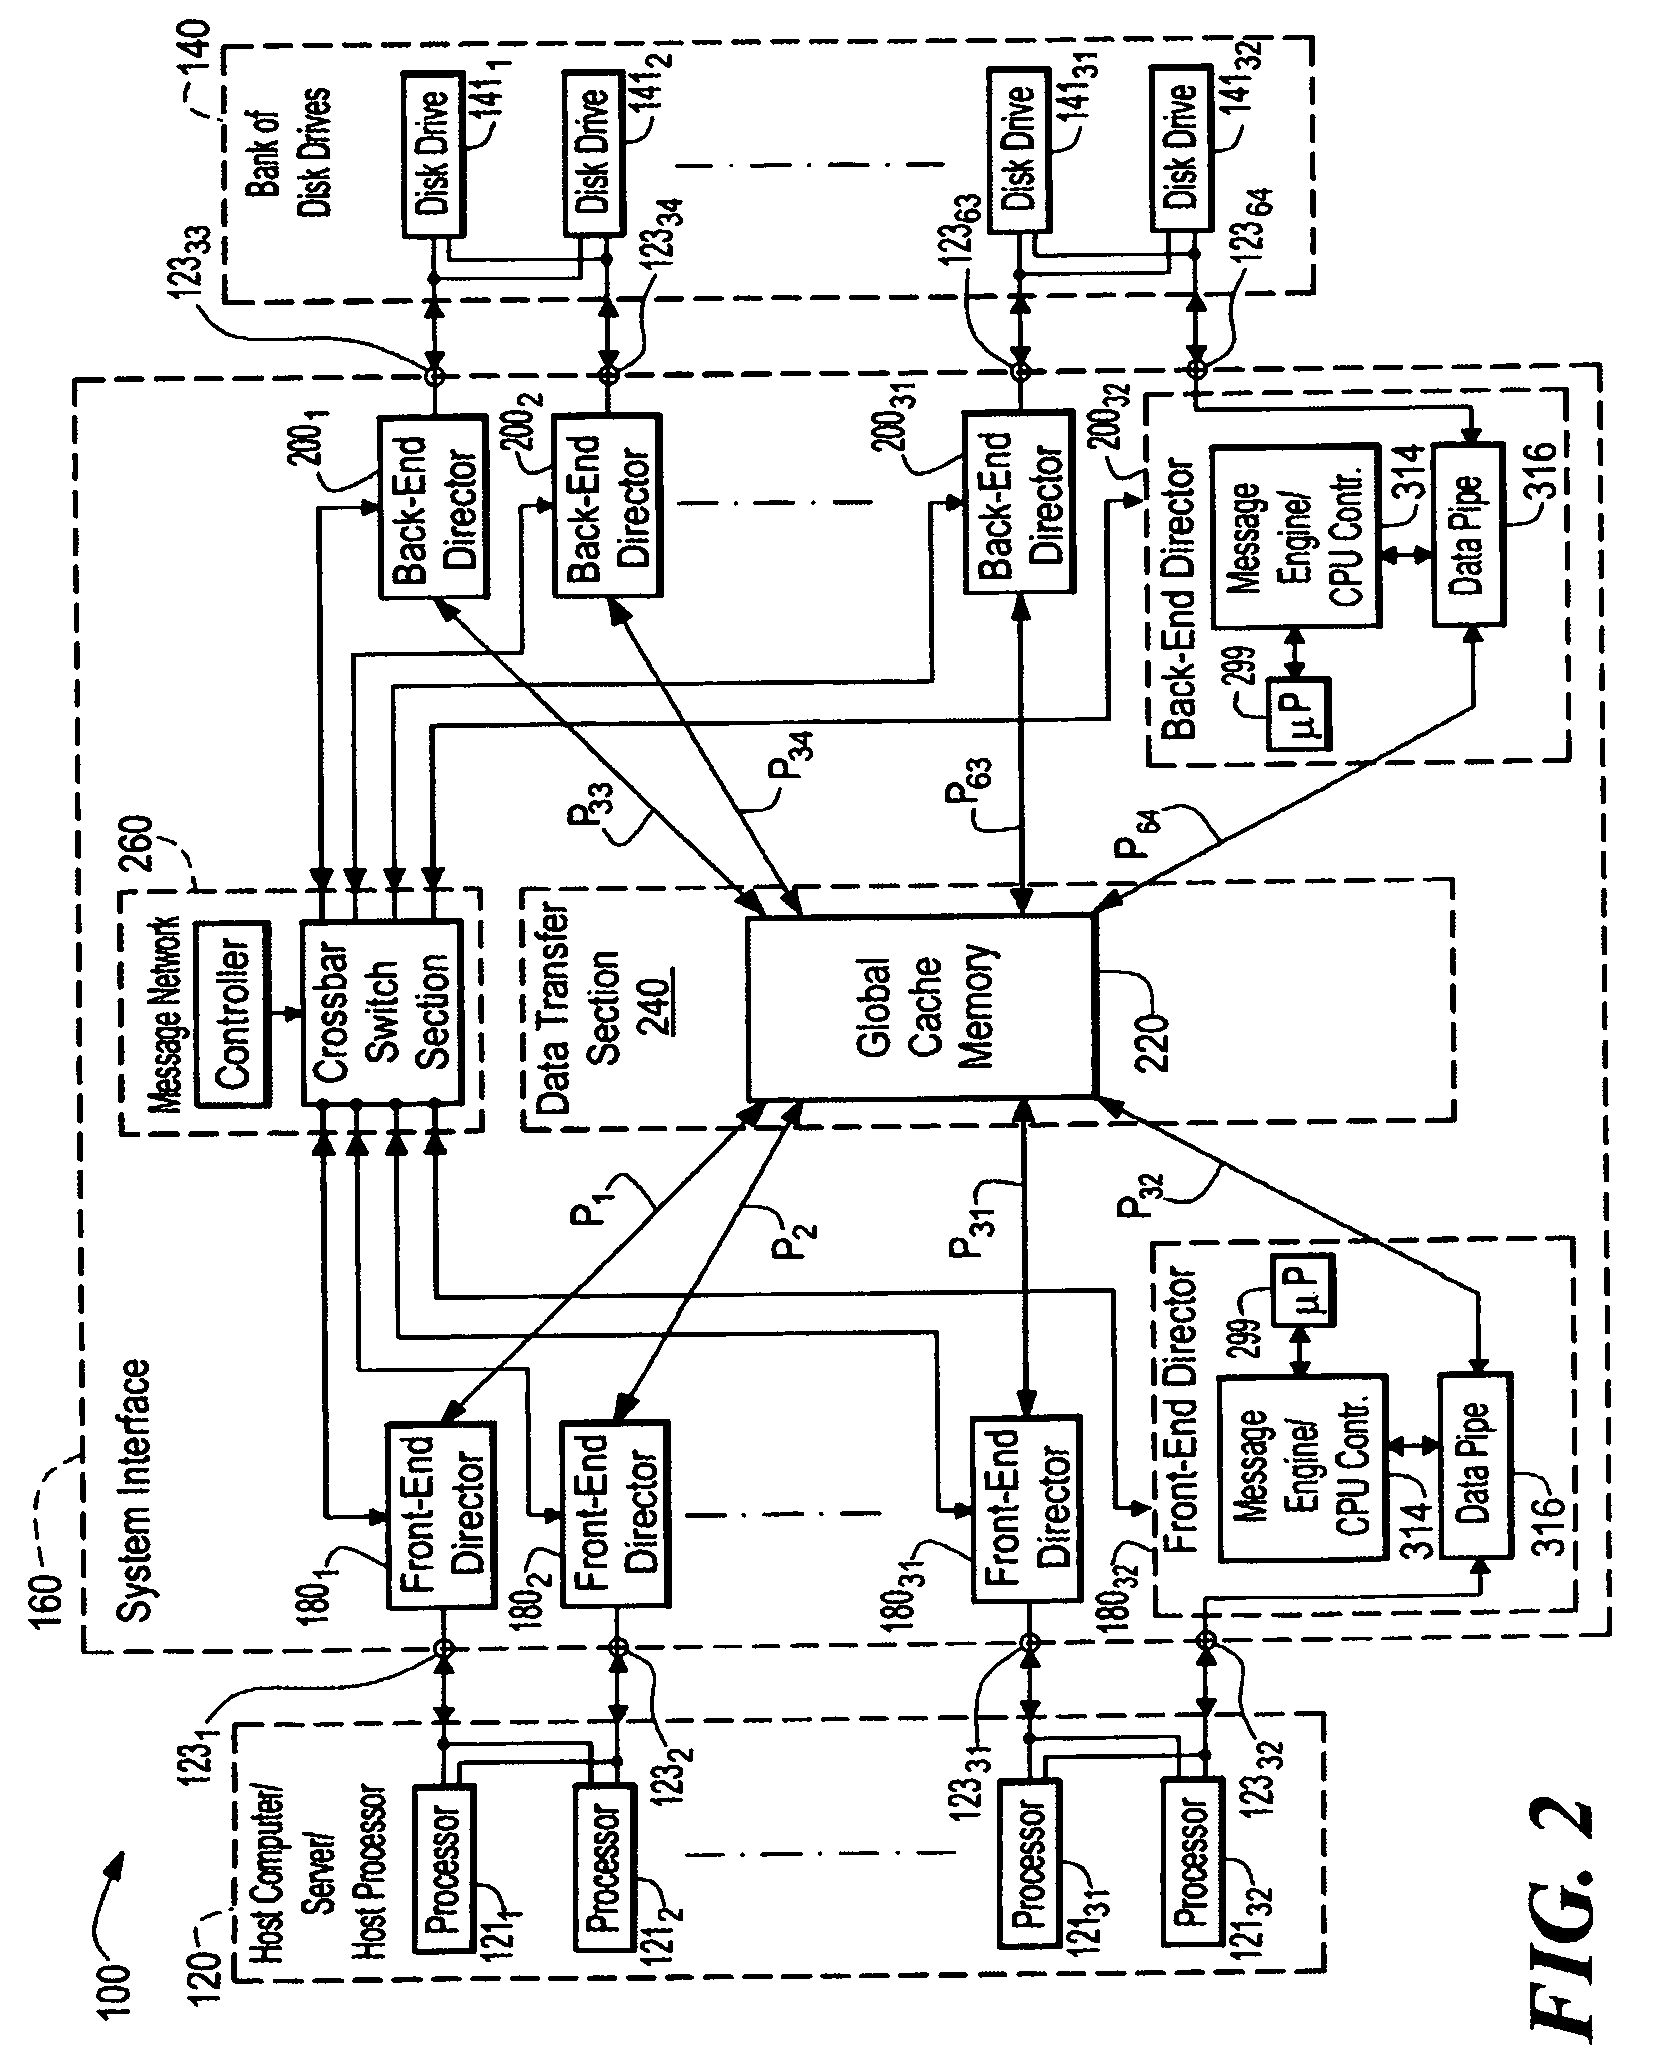 Data storage system having separate data transfer section and message network